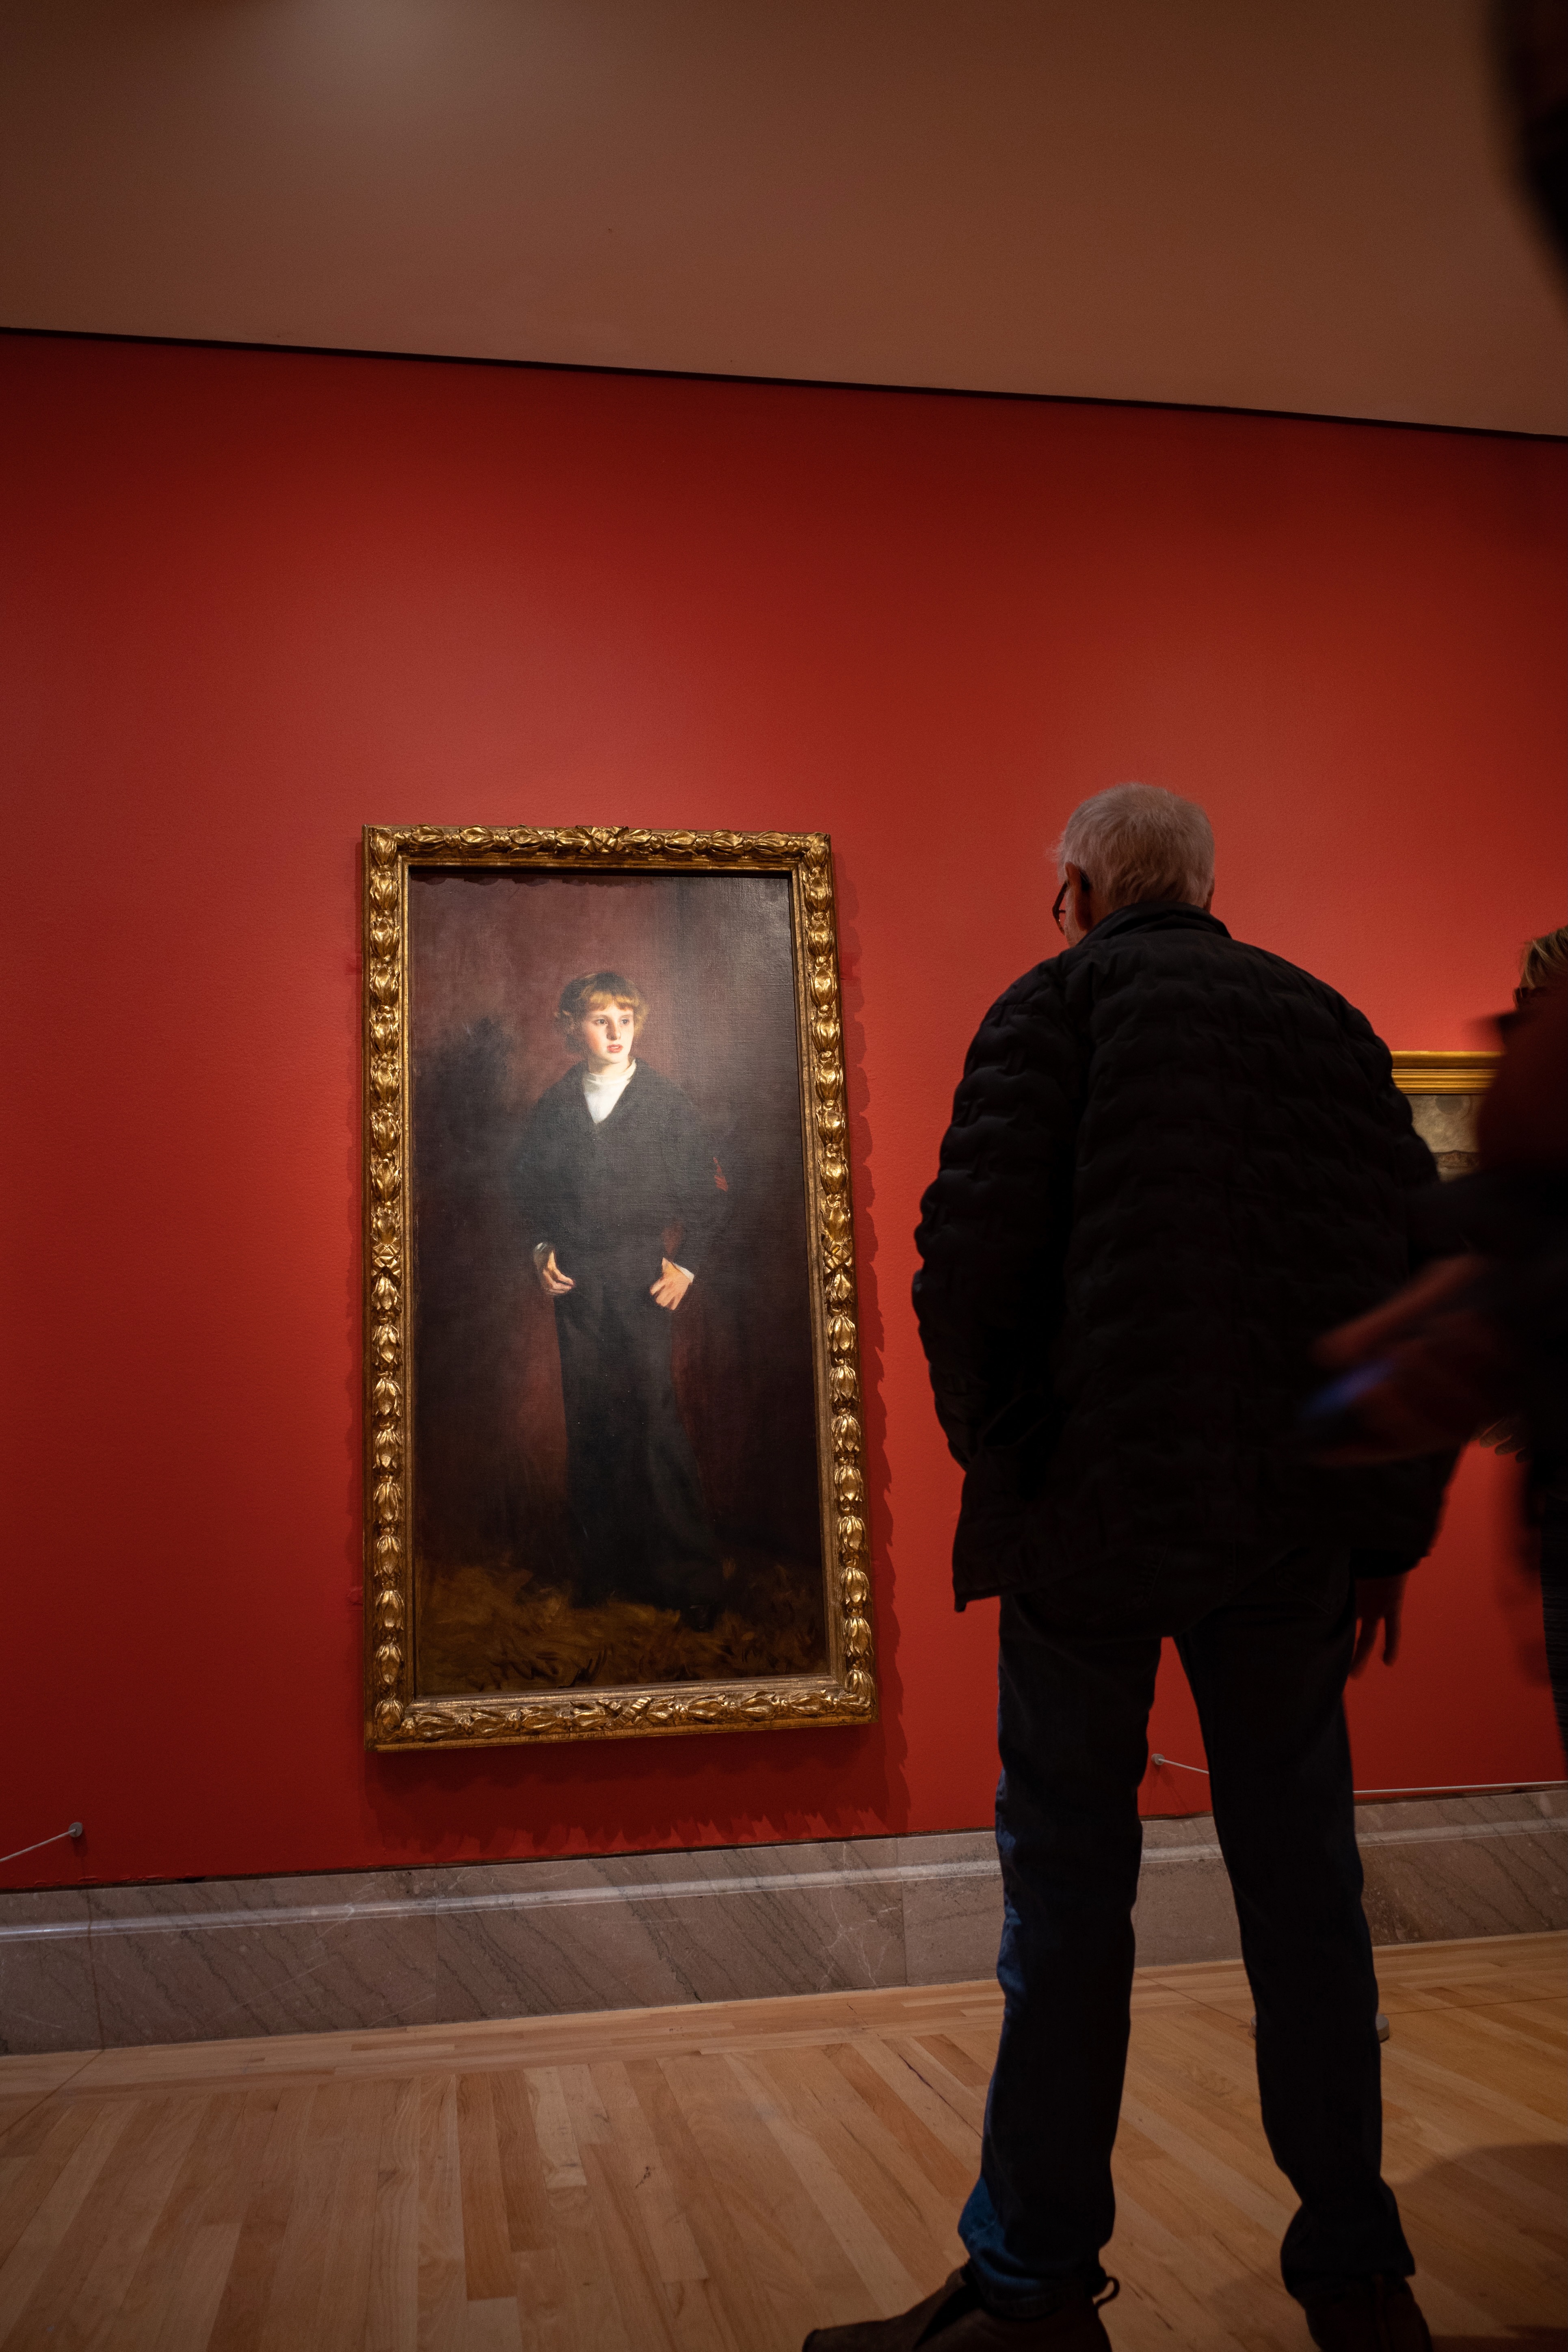 Art gallery staredown between old man and painting of young man